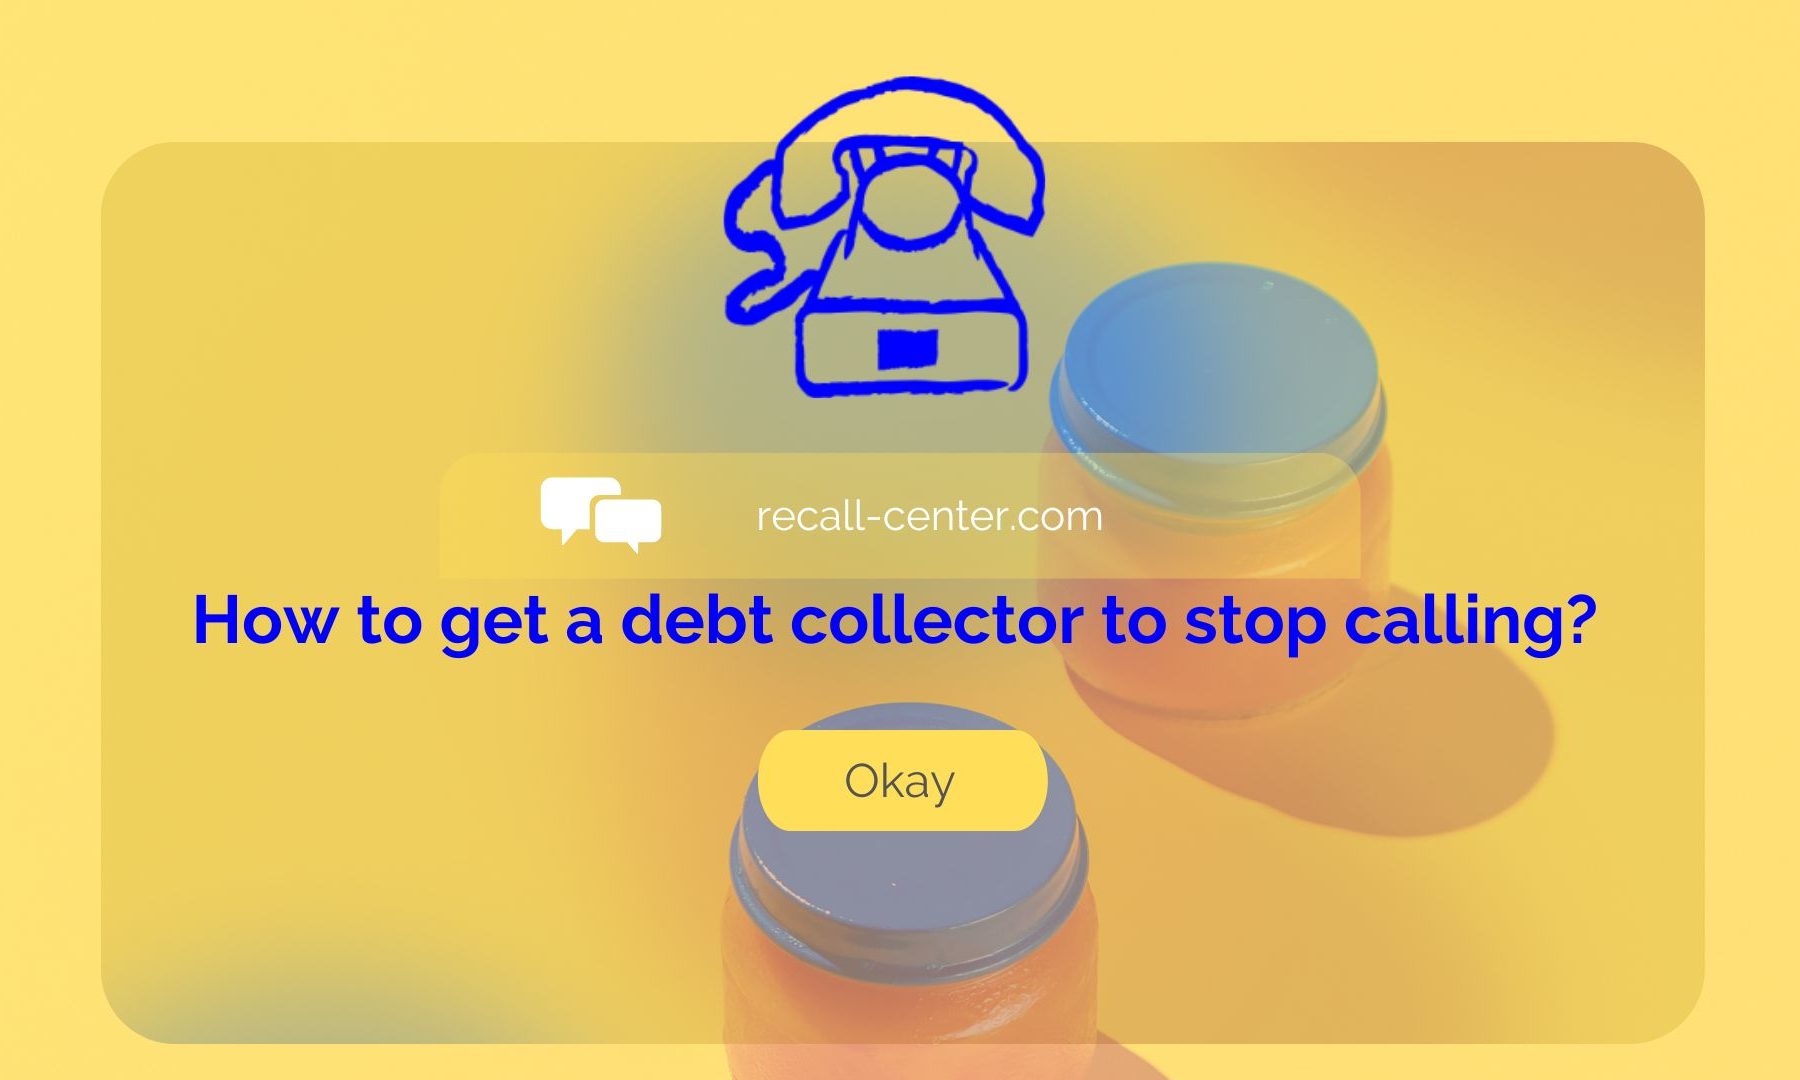 How to get a debt collector to stop calling